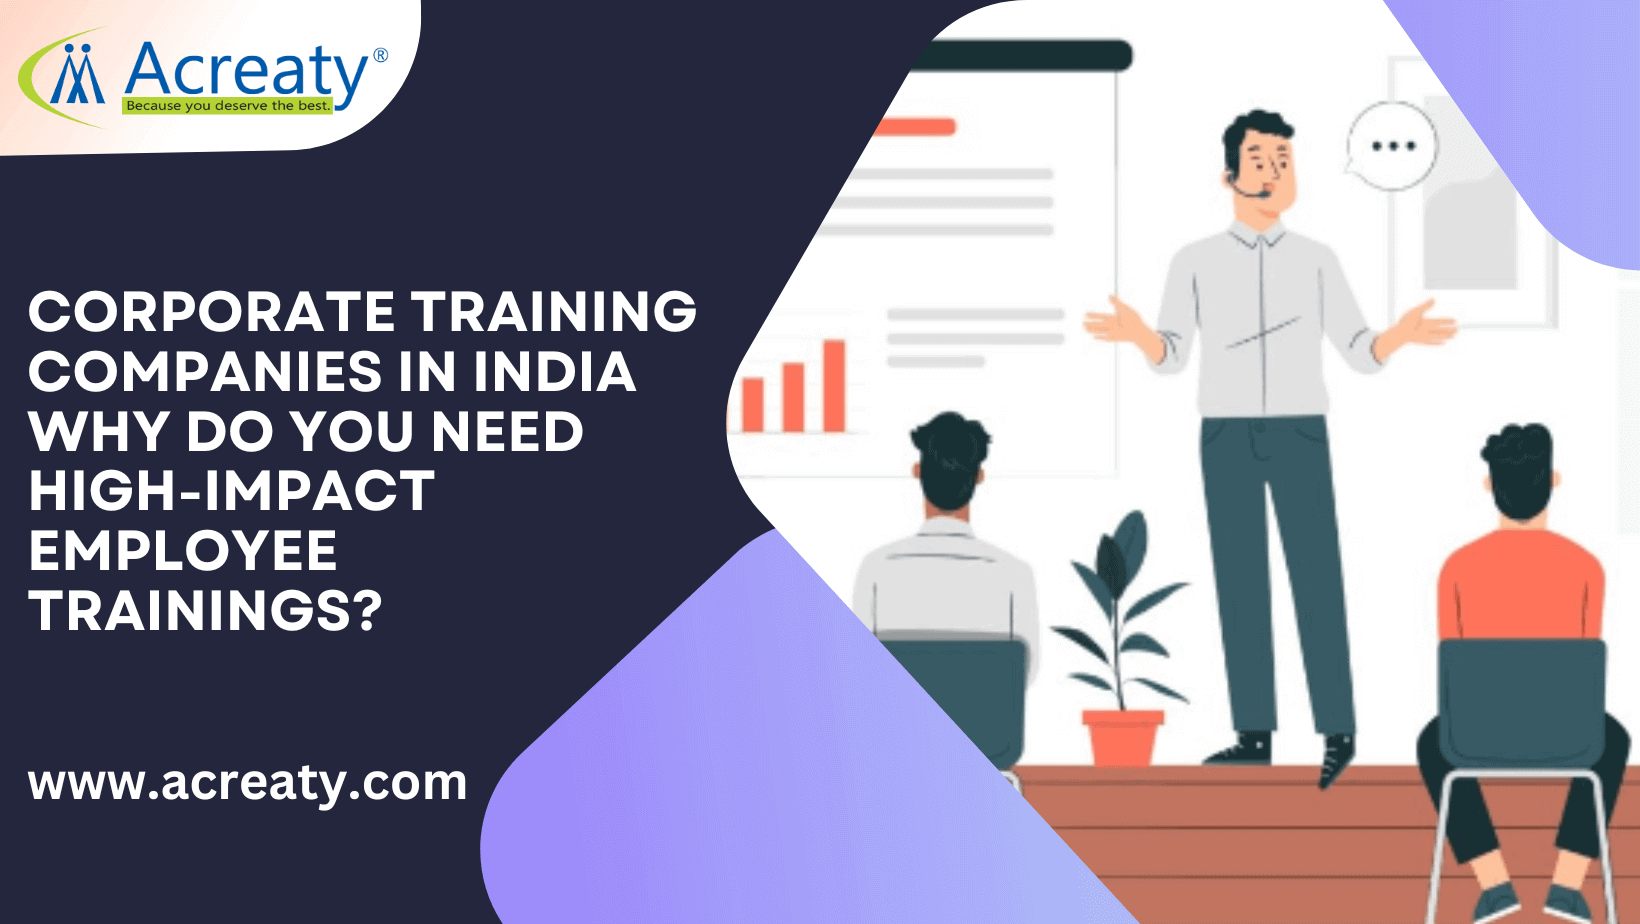 Corporate Training Companies in India: Why do you need high-impact employee trainings?